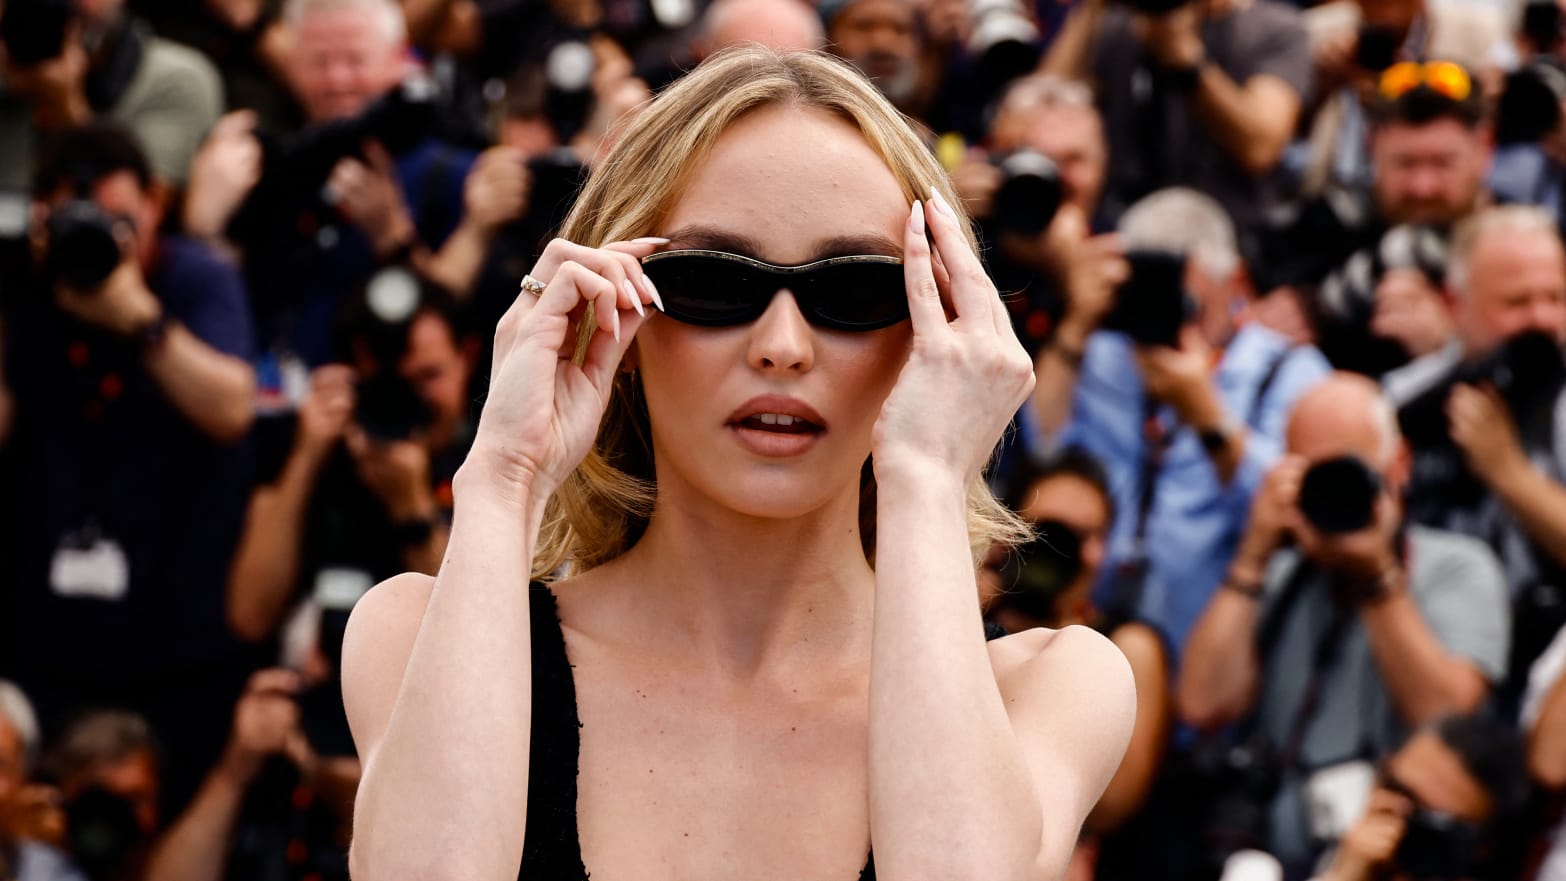 Lily-Rose Depp Wears 3 LBDs in 24 Hours at Cannes Film Festival